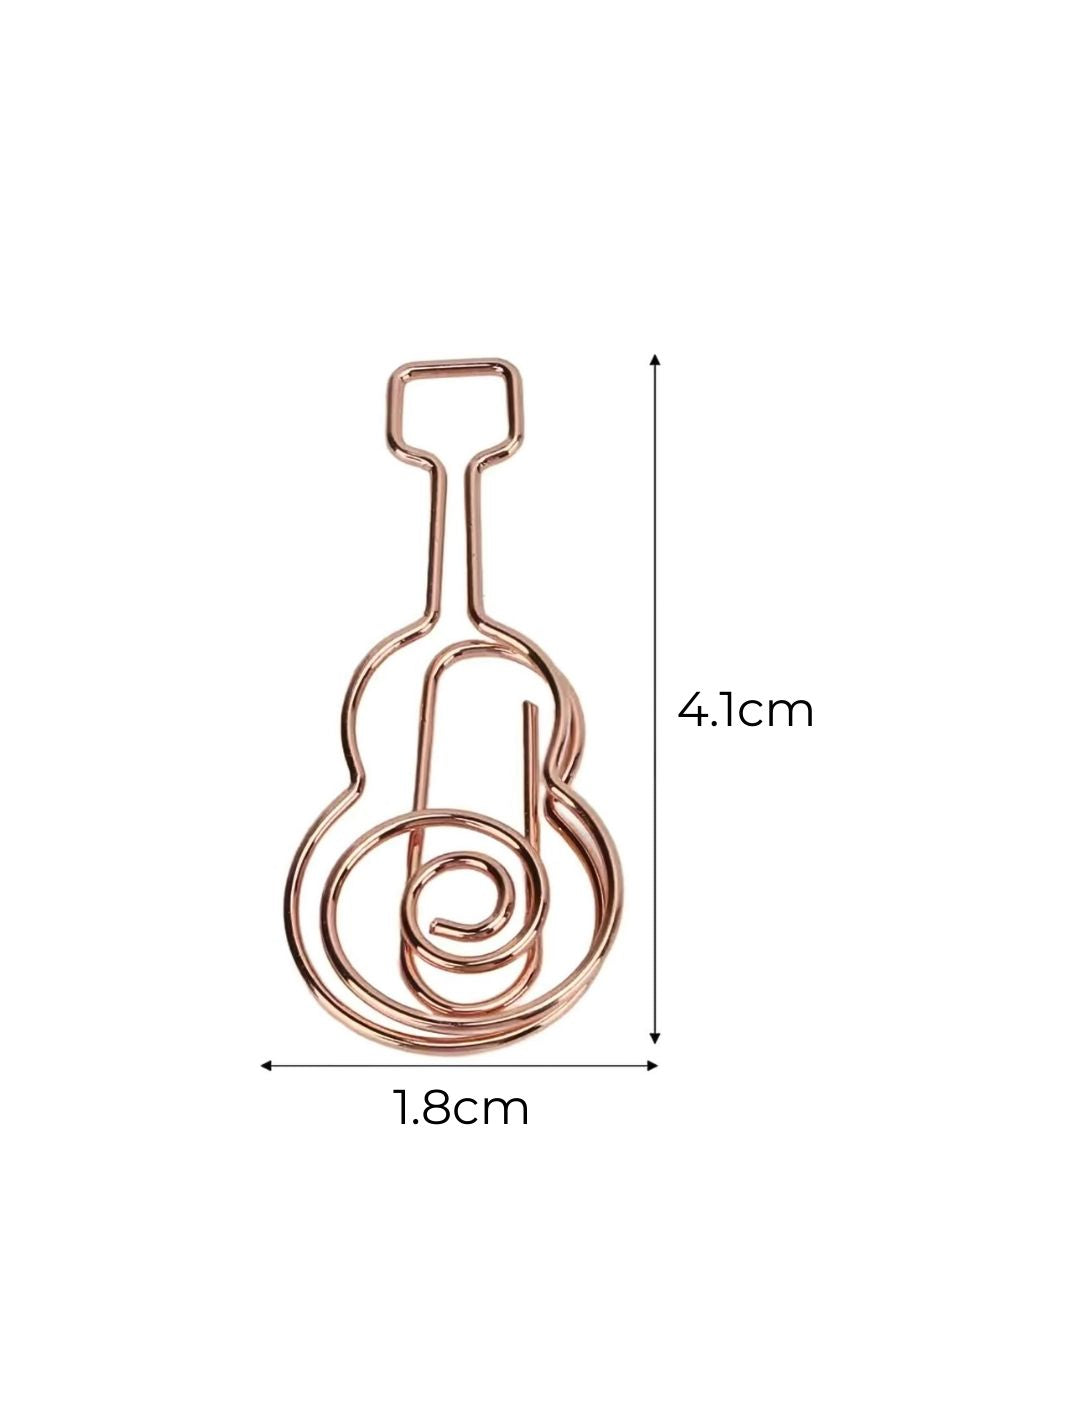 Guitar Paperclips for Music Lovers - Rose Gold